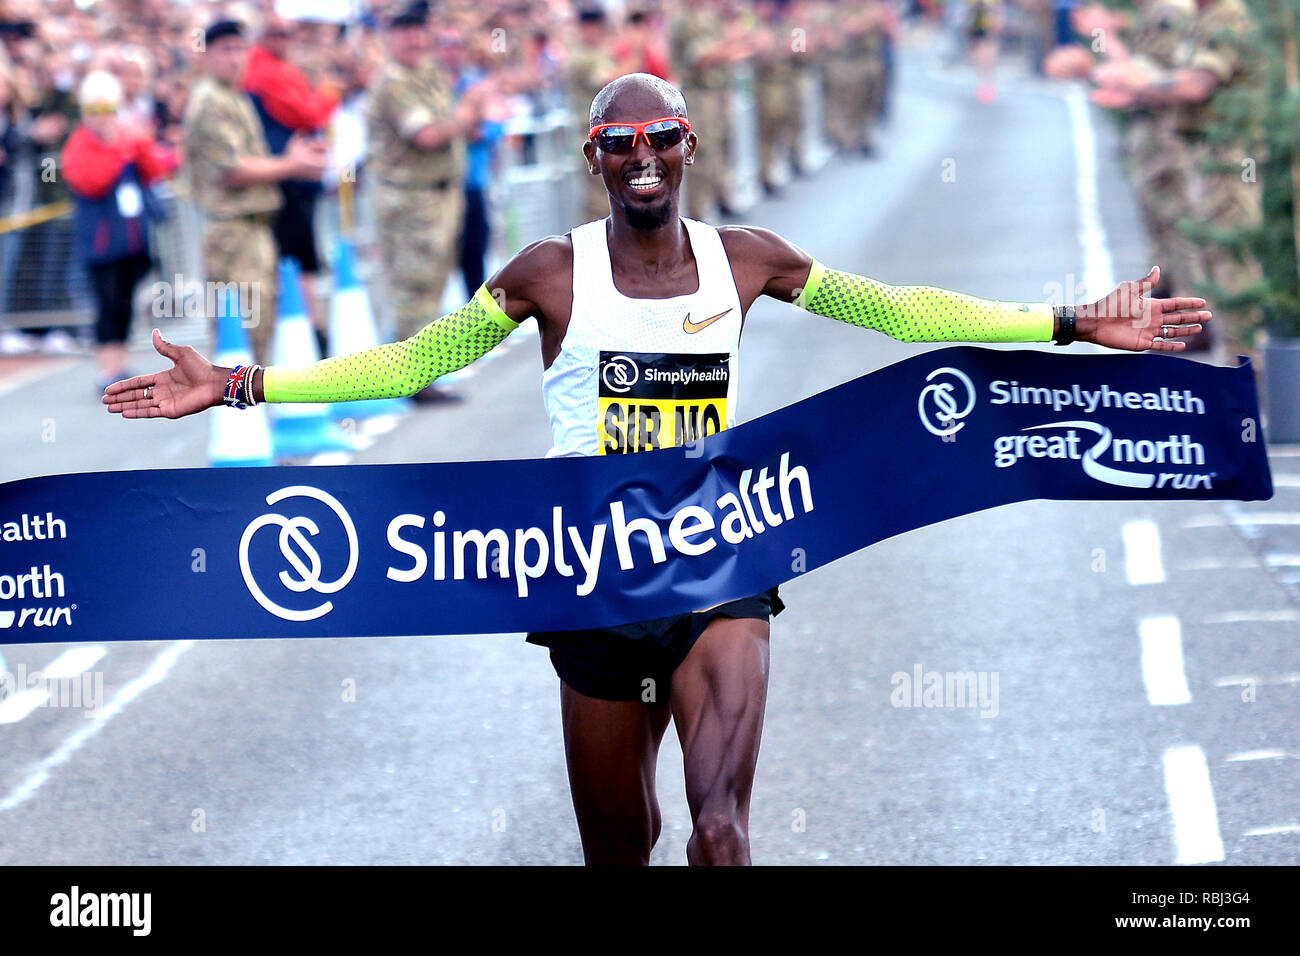 Athlete finishing line run Cut Out Stock Images & Pictures - Alamy